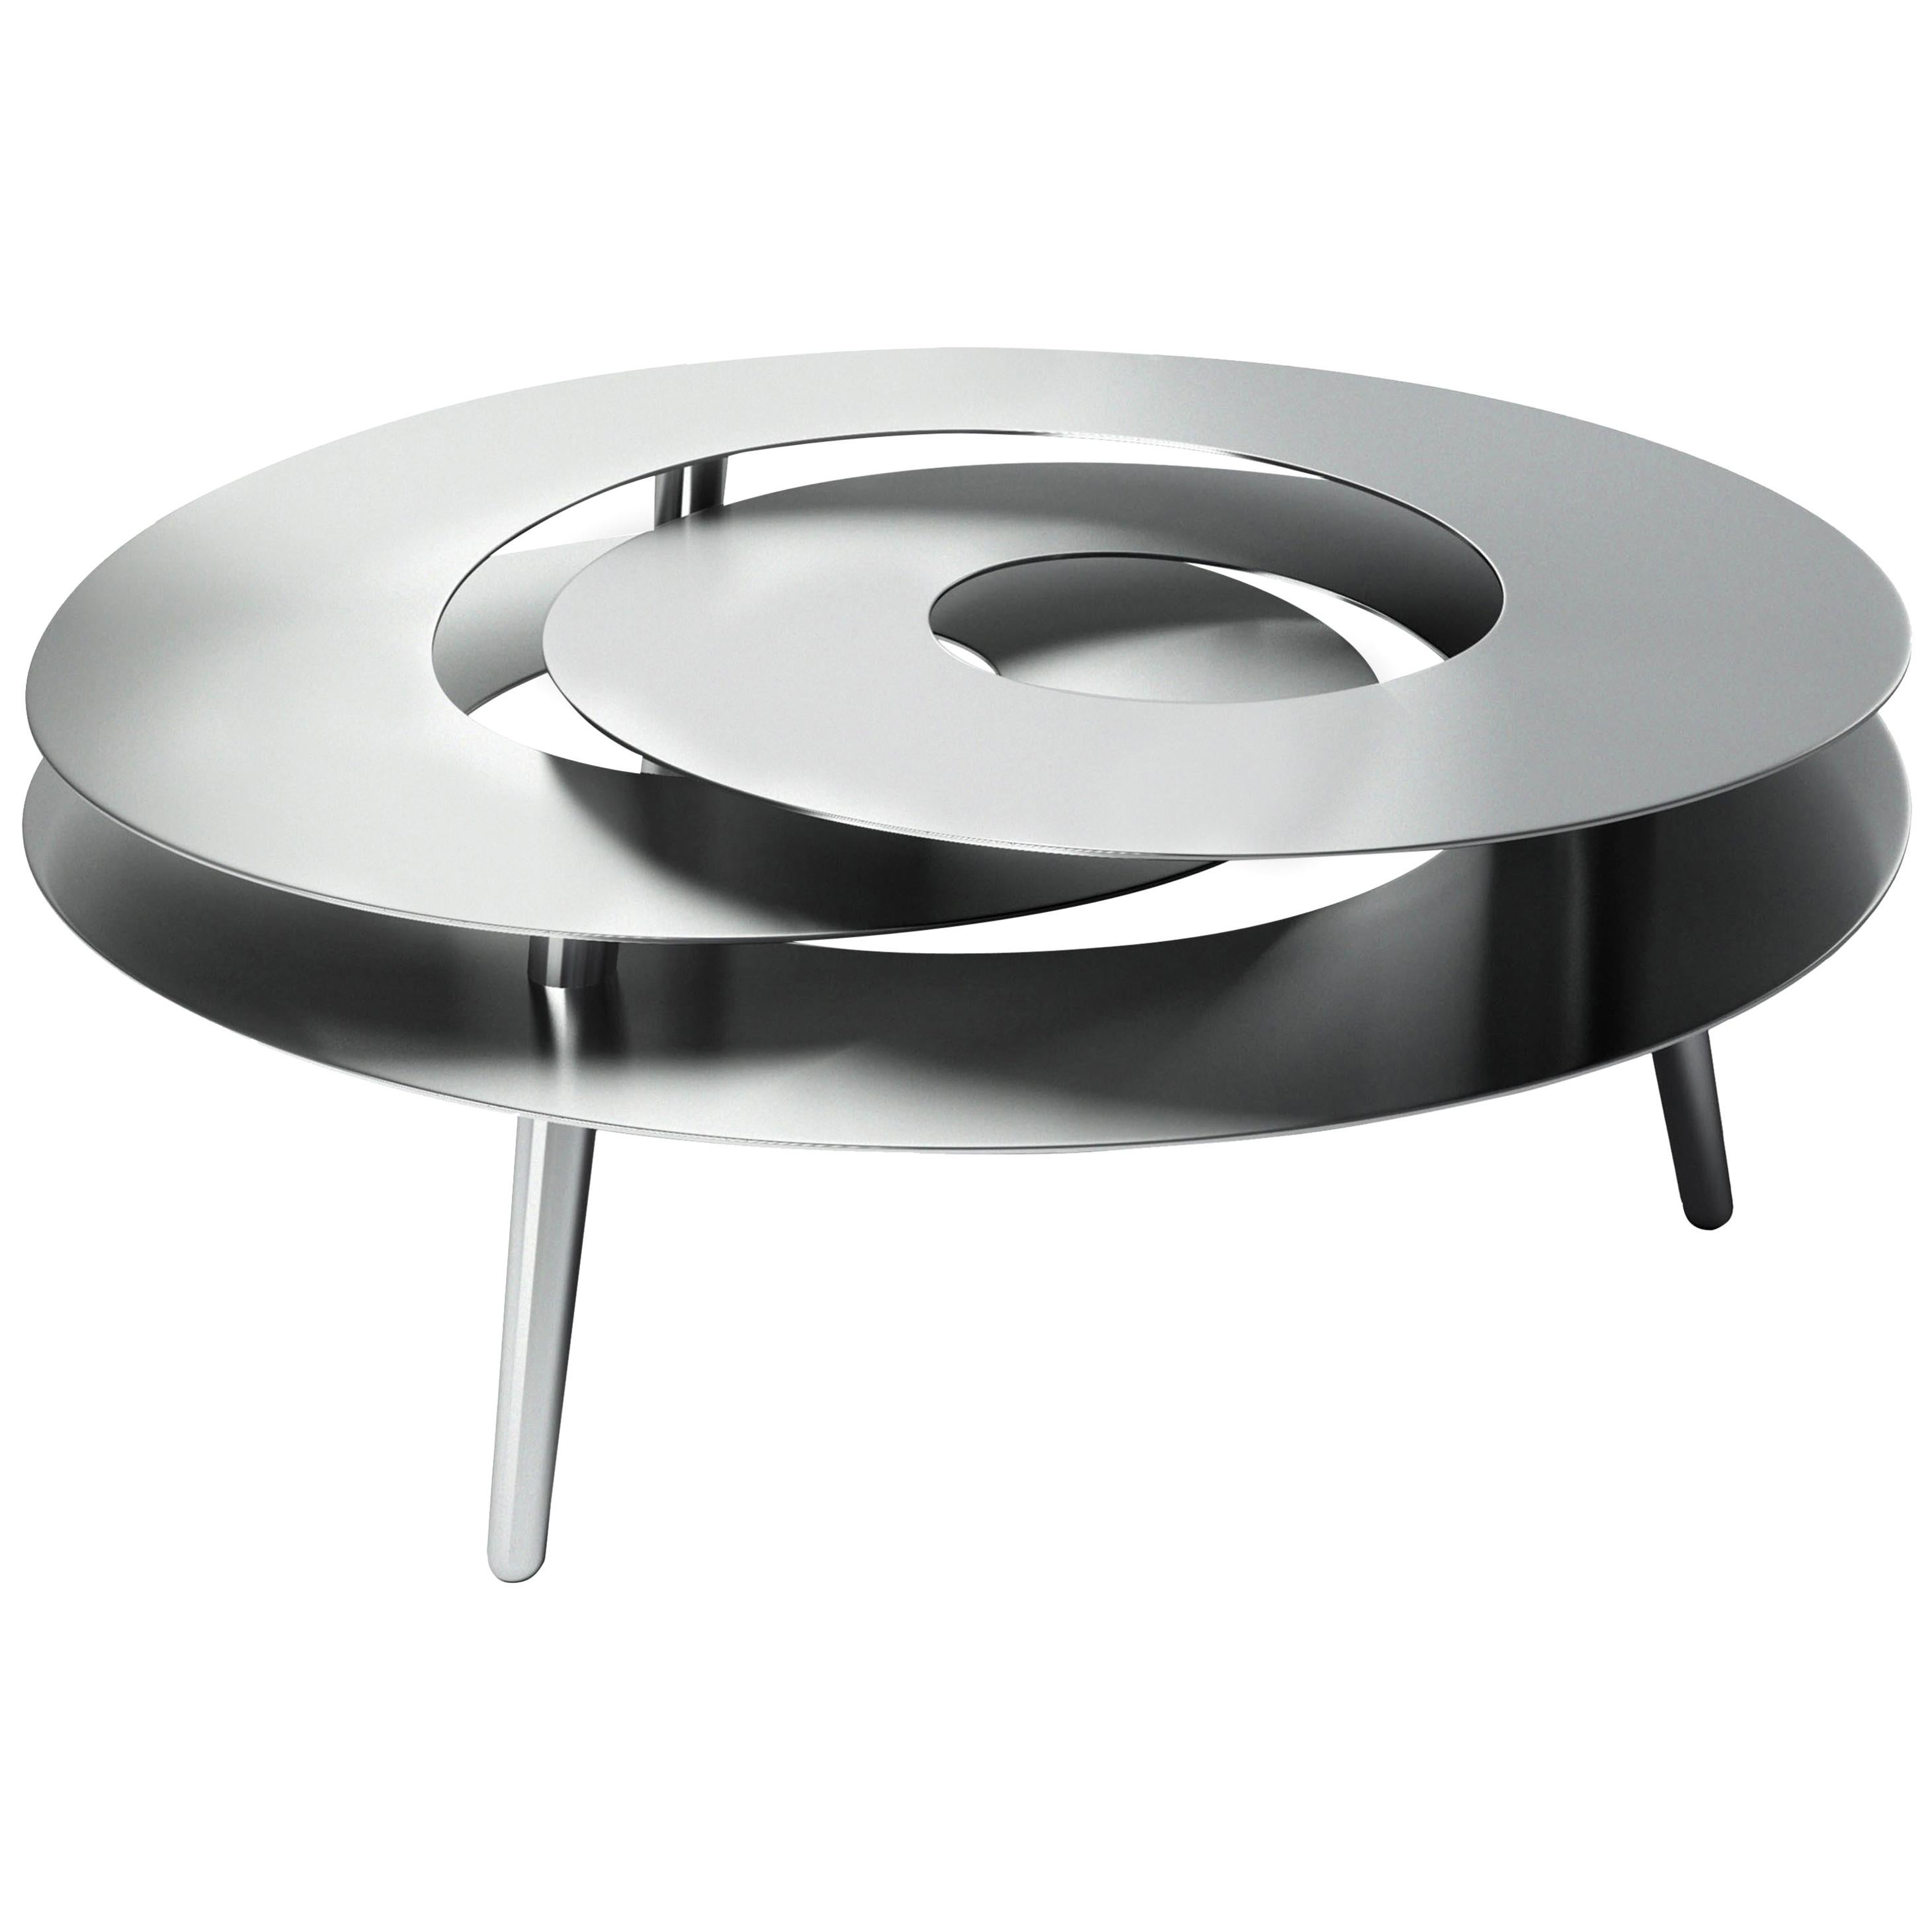 Rollercoaster Medium Coffee Table, Polished Stainless Steel